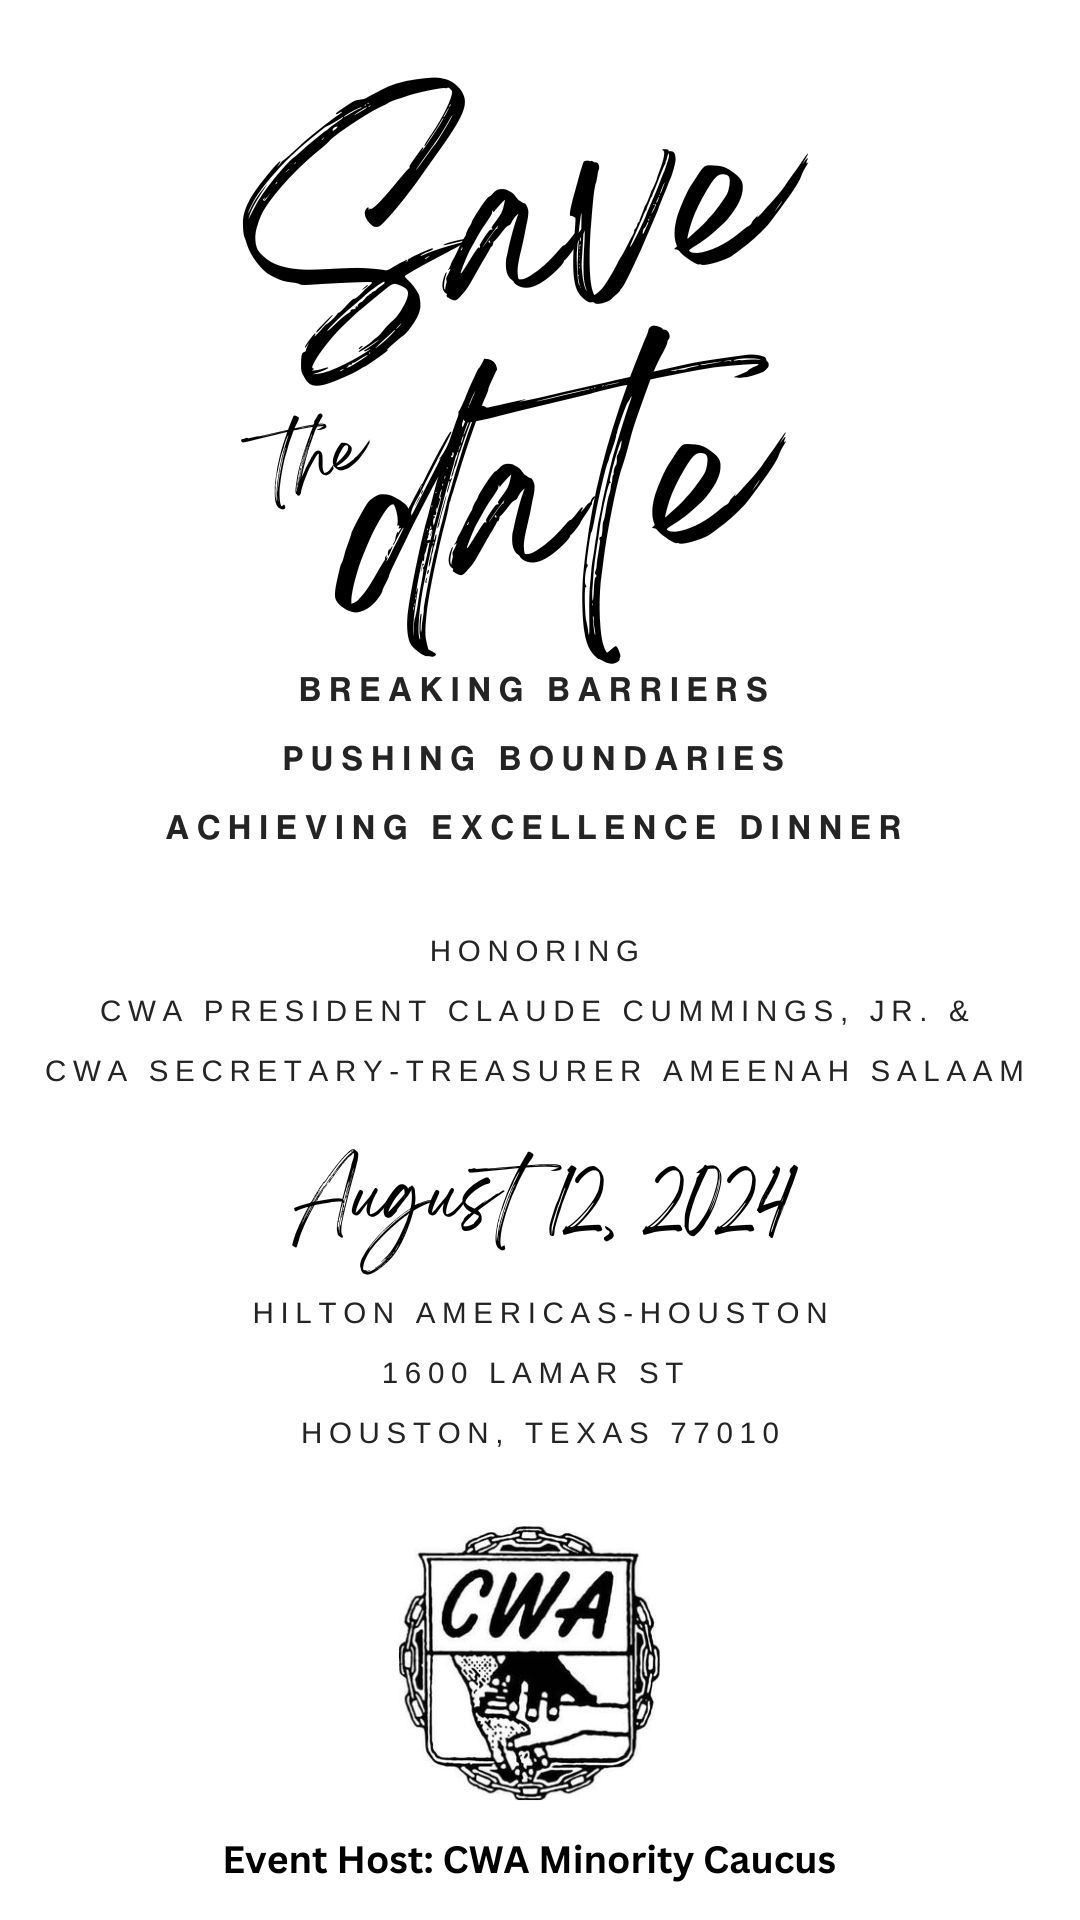 BREAKING BARRIERS PUSHING BOUNDARIES ACHIEVING EXCELLENCE DINNER